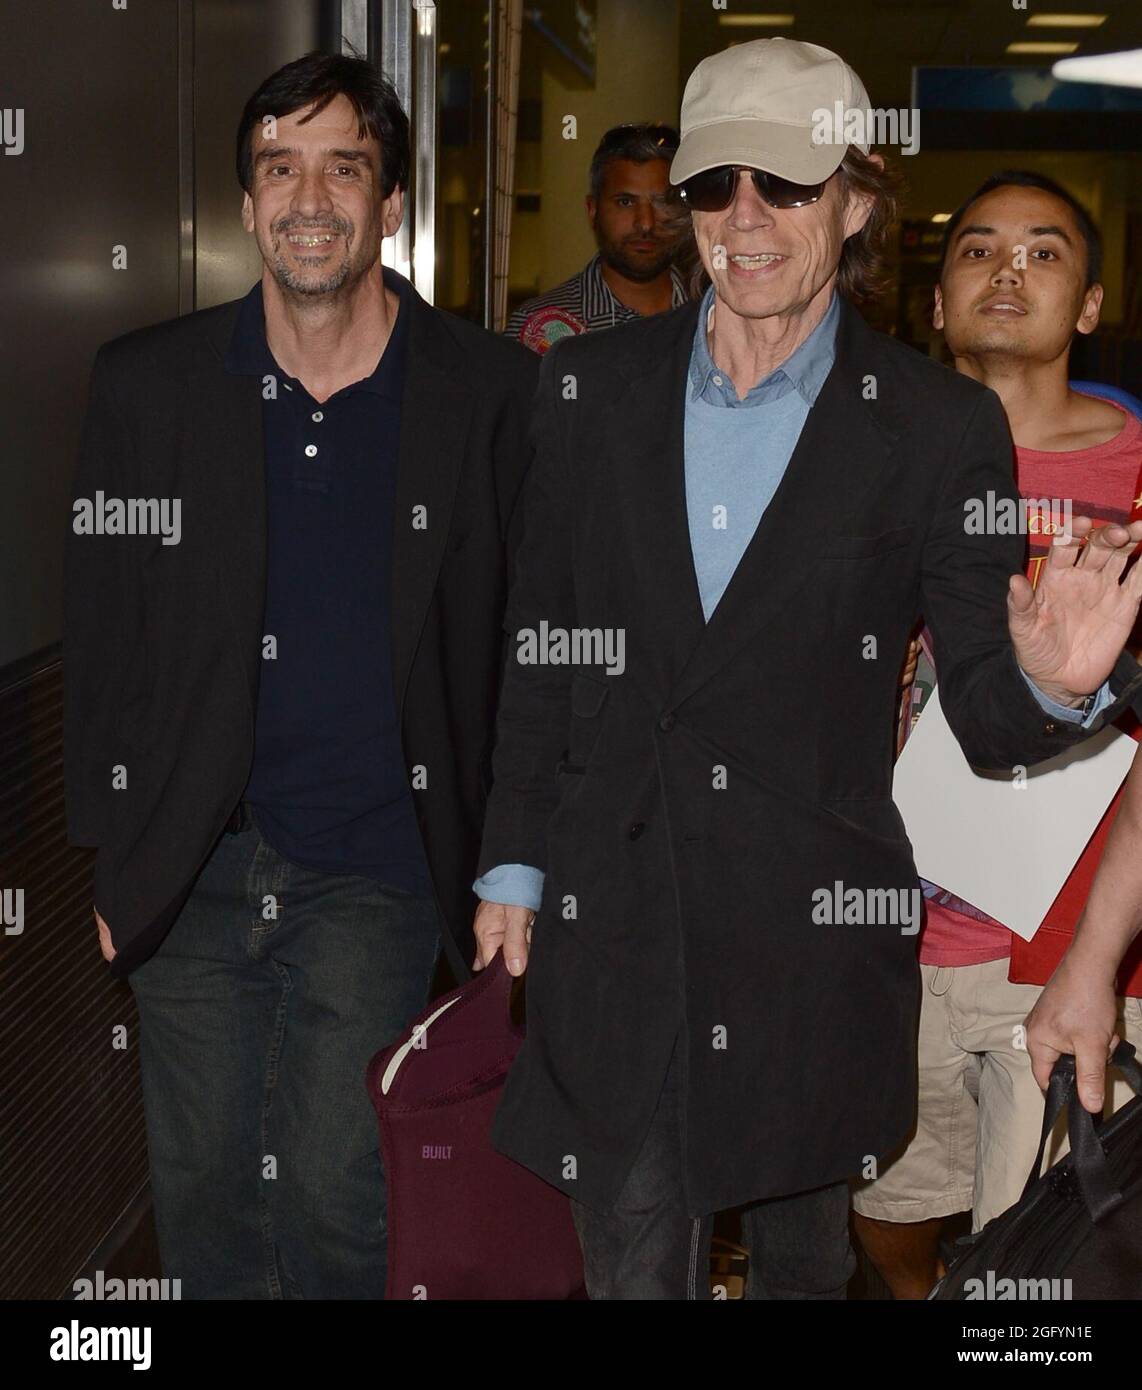 Michael Philip Jagger High Resolution Stock Photography and Images - Alamy